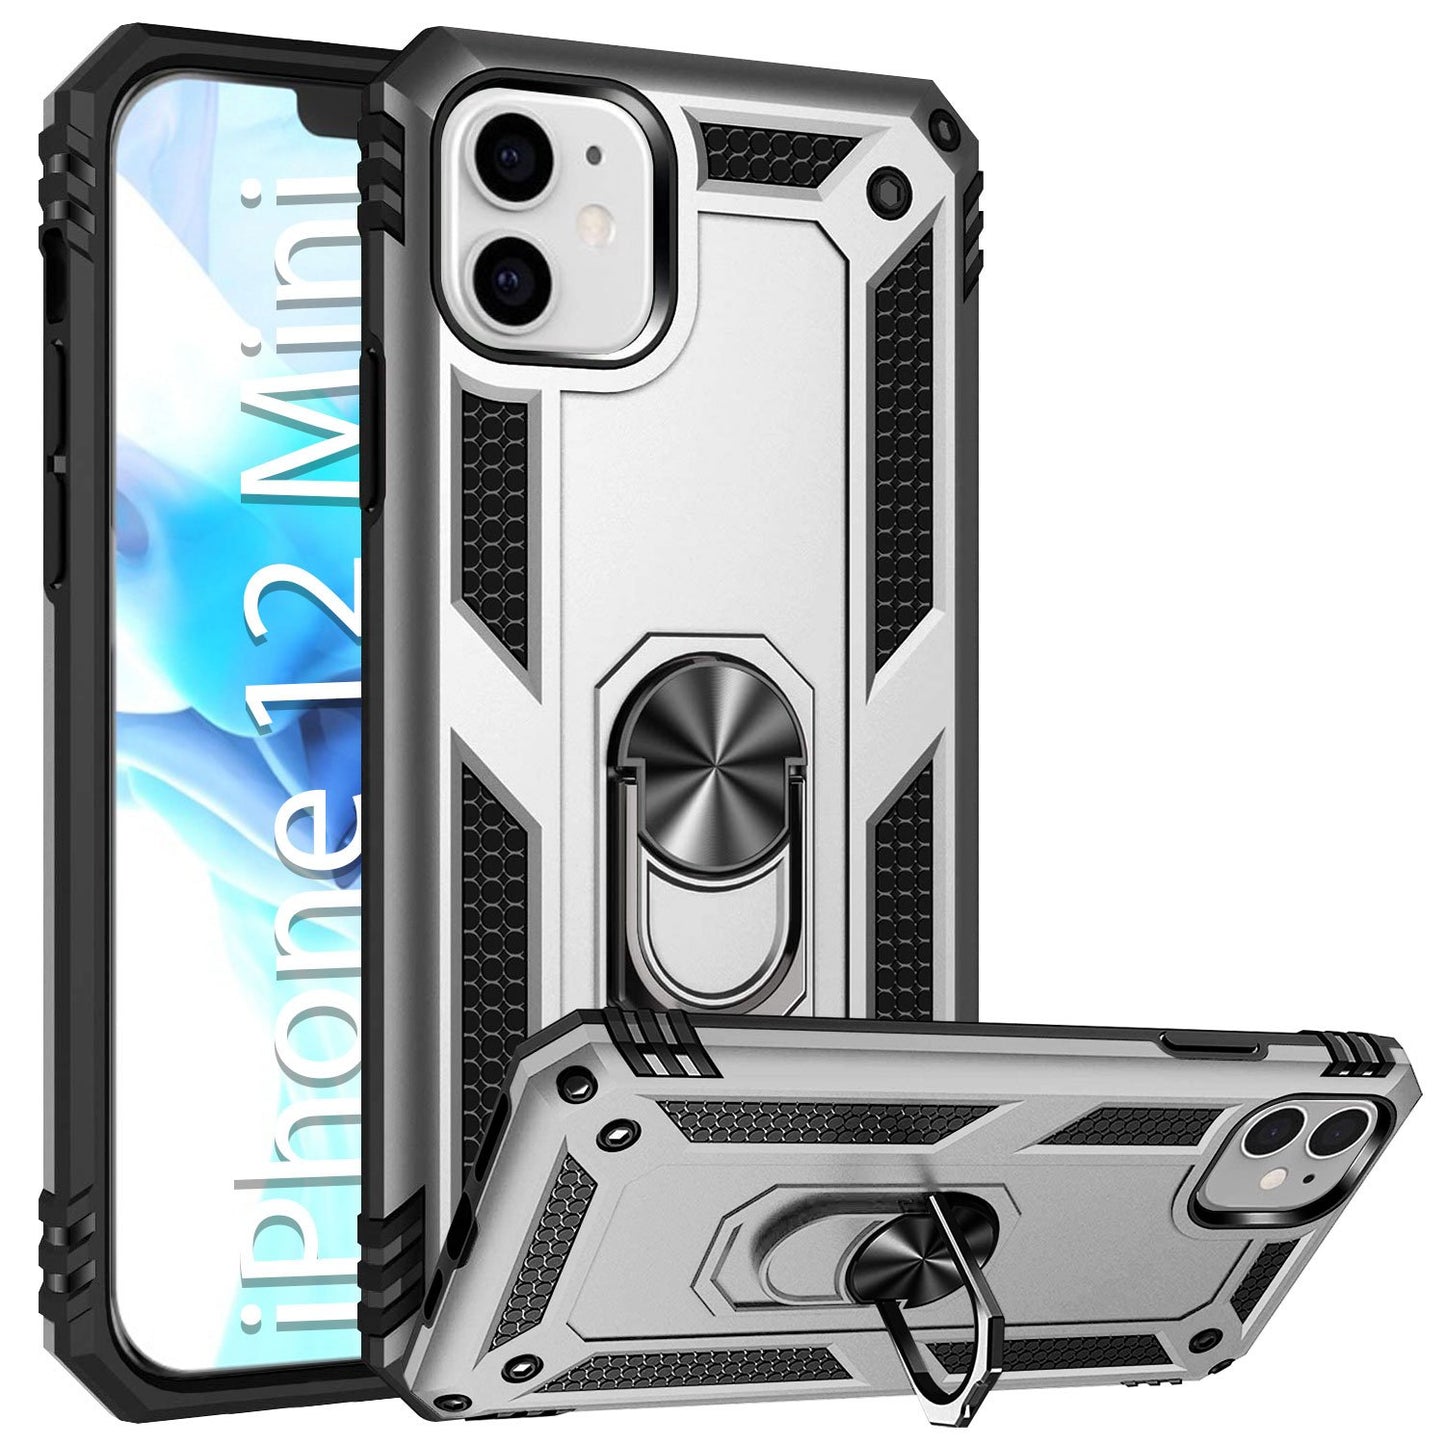 CCIPH12IFSL - iPhone 12 Mini Combo Case, Shockproof Case with Built in Ring, Kickstand and Magnet for Car Mounts Compatible to Apple iPhone 12 Mini